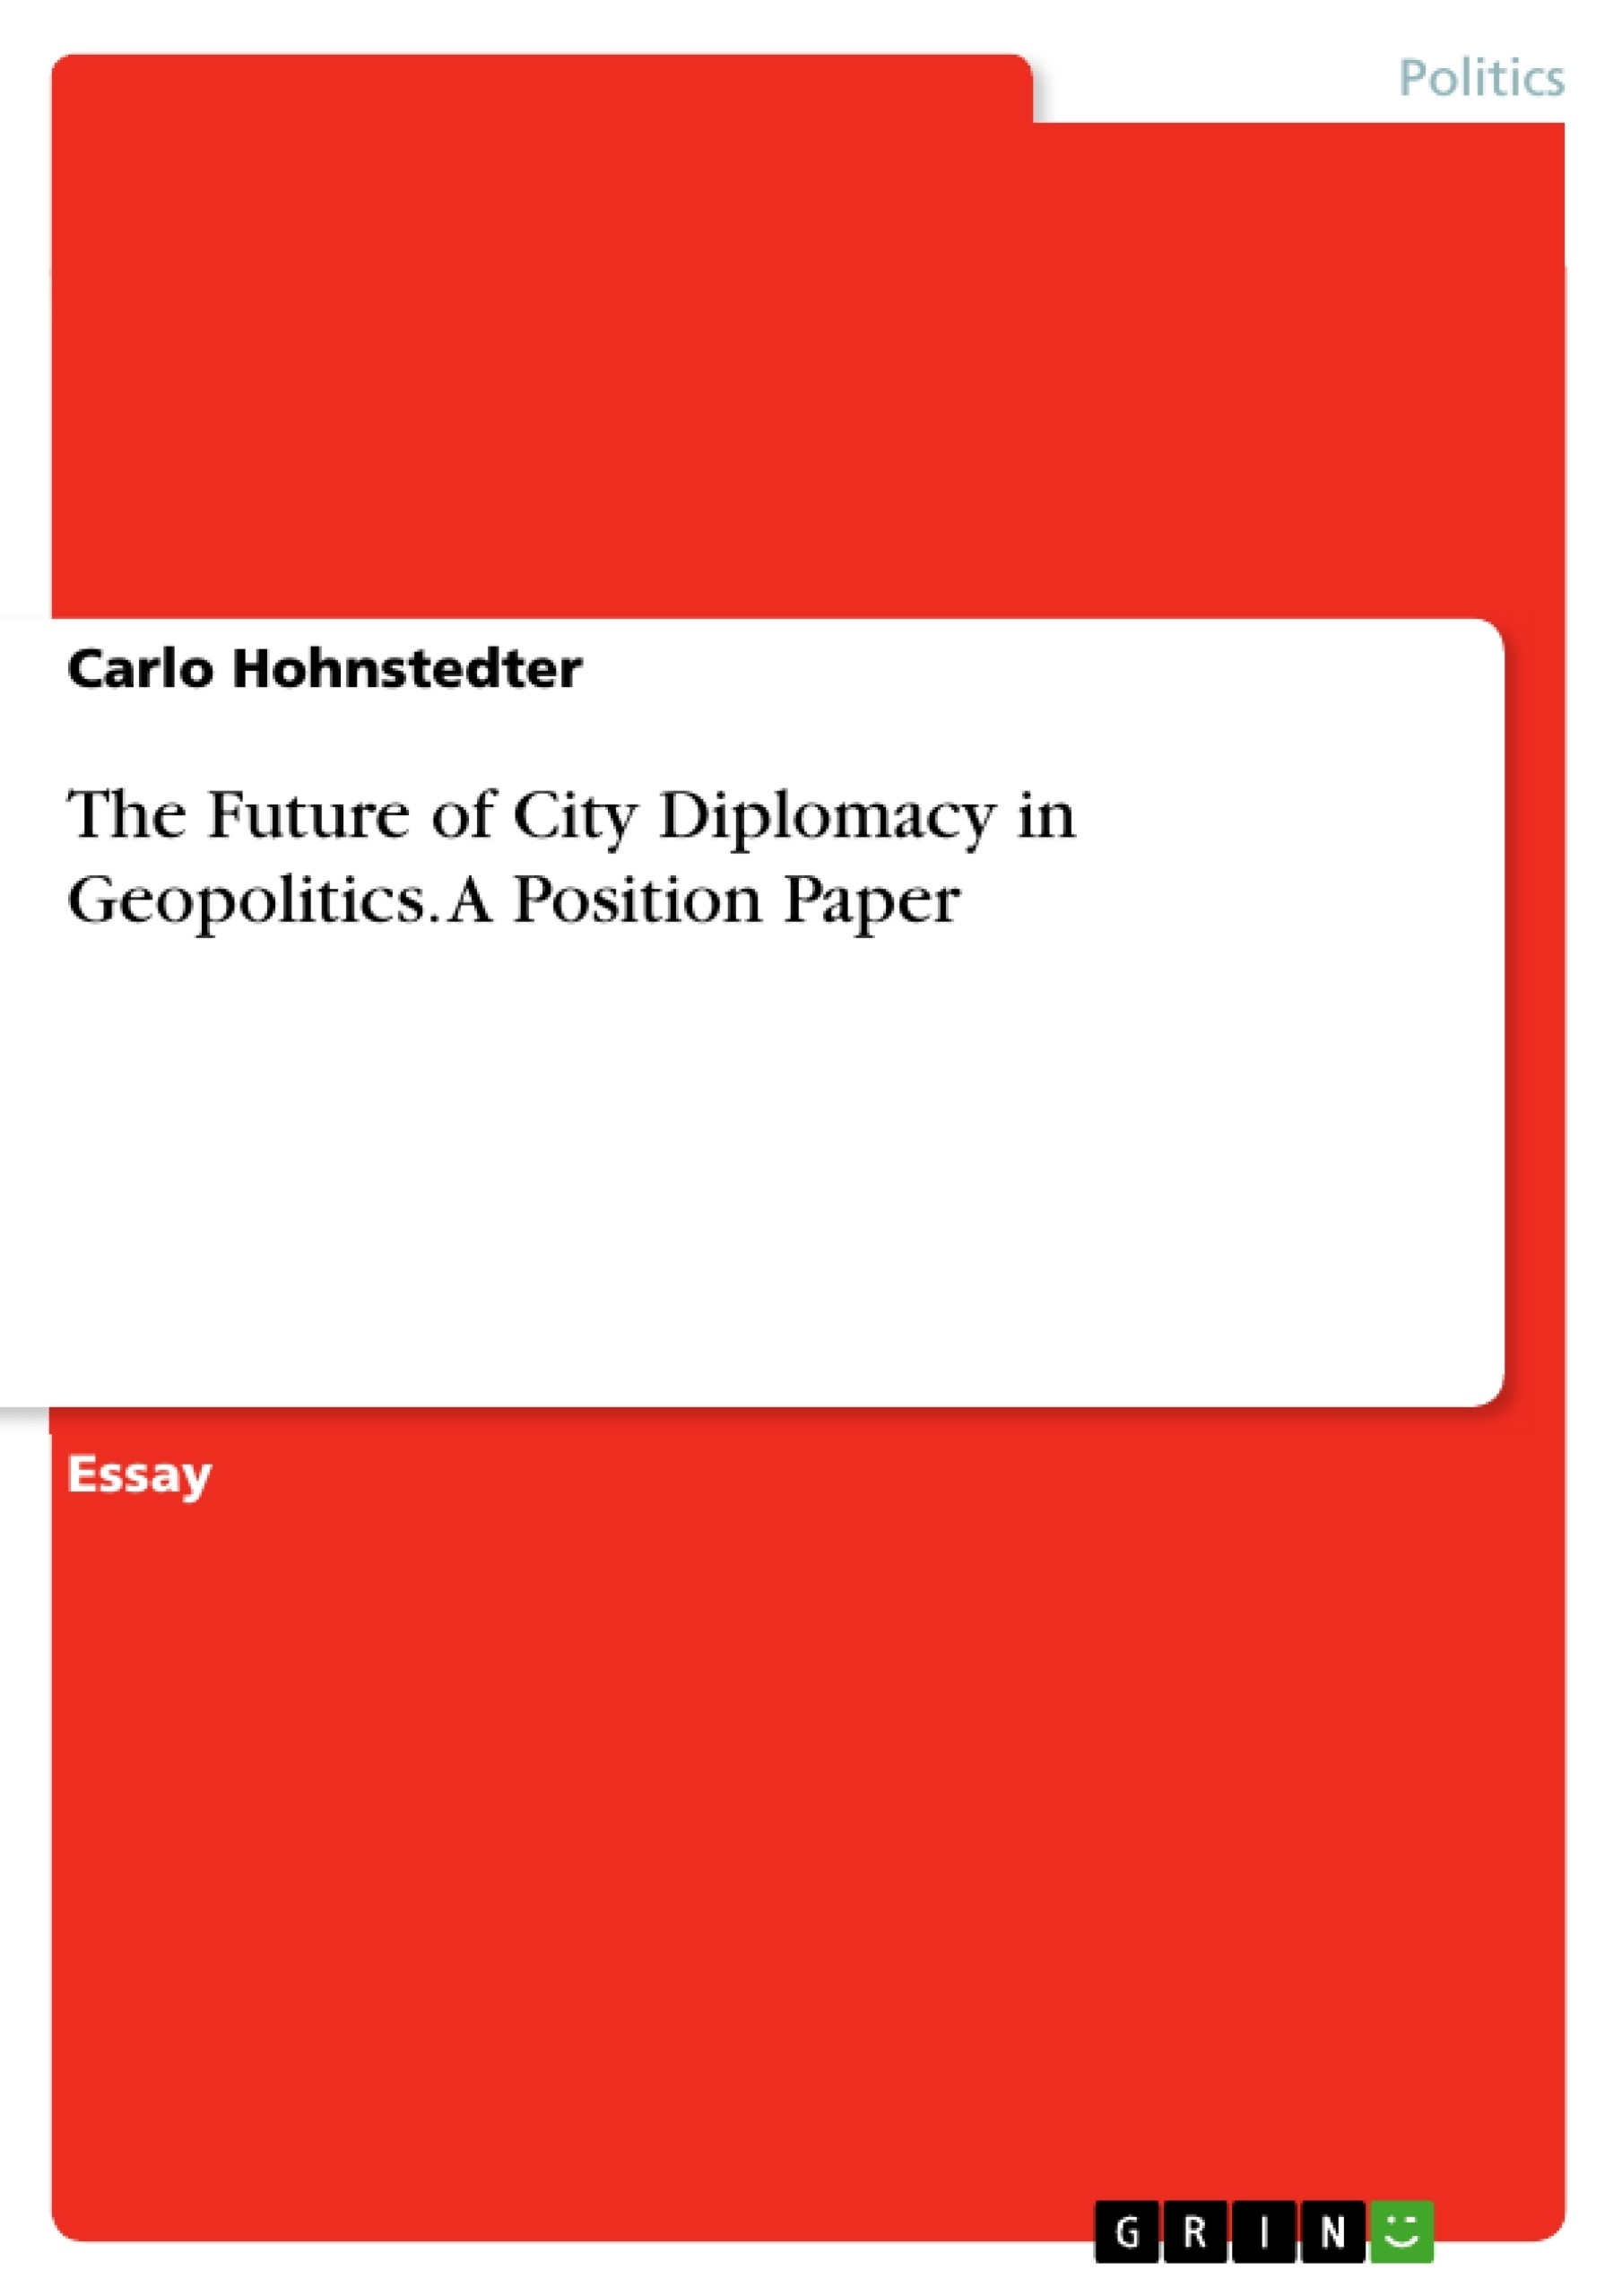 Title: The Future of City Diplomacy in Geopolitics. A Position Paper